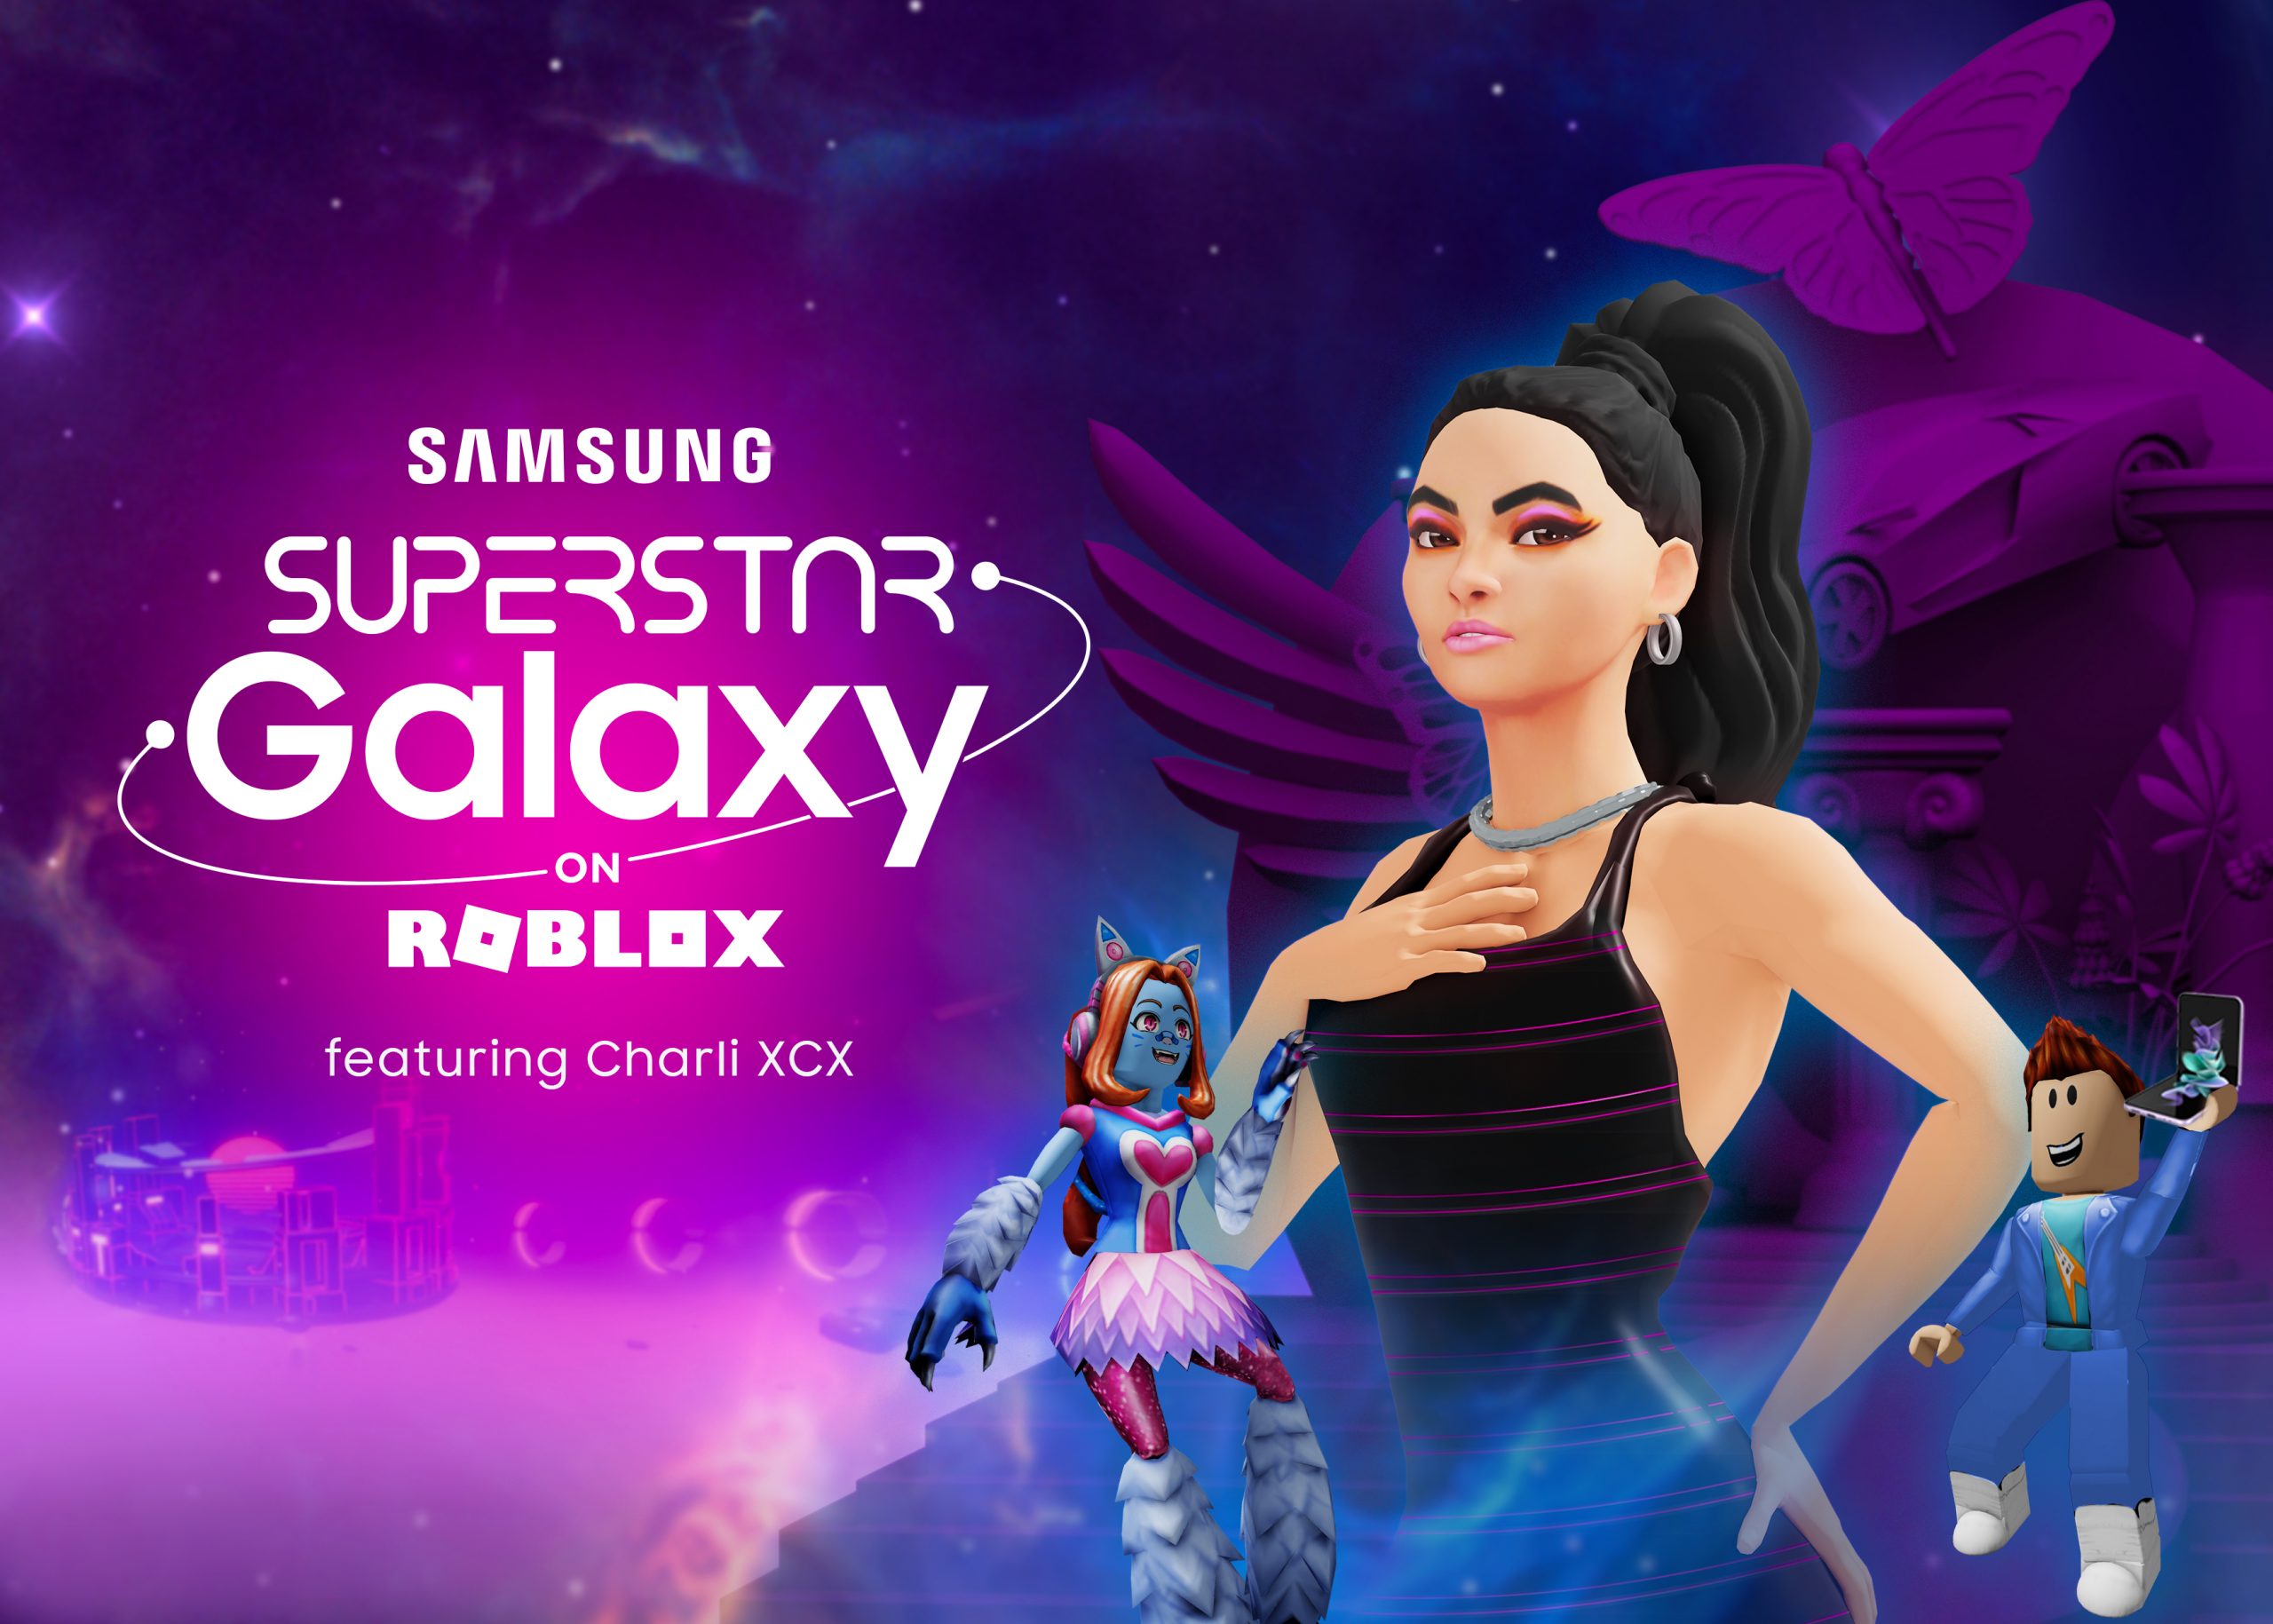 Samsung Superstar Galaxy on Roblox featuring Pop Icon Charli XCX Now Available